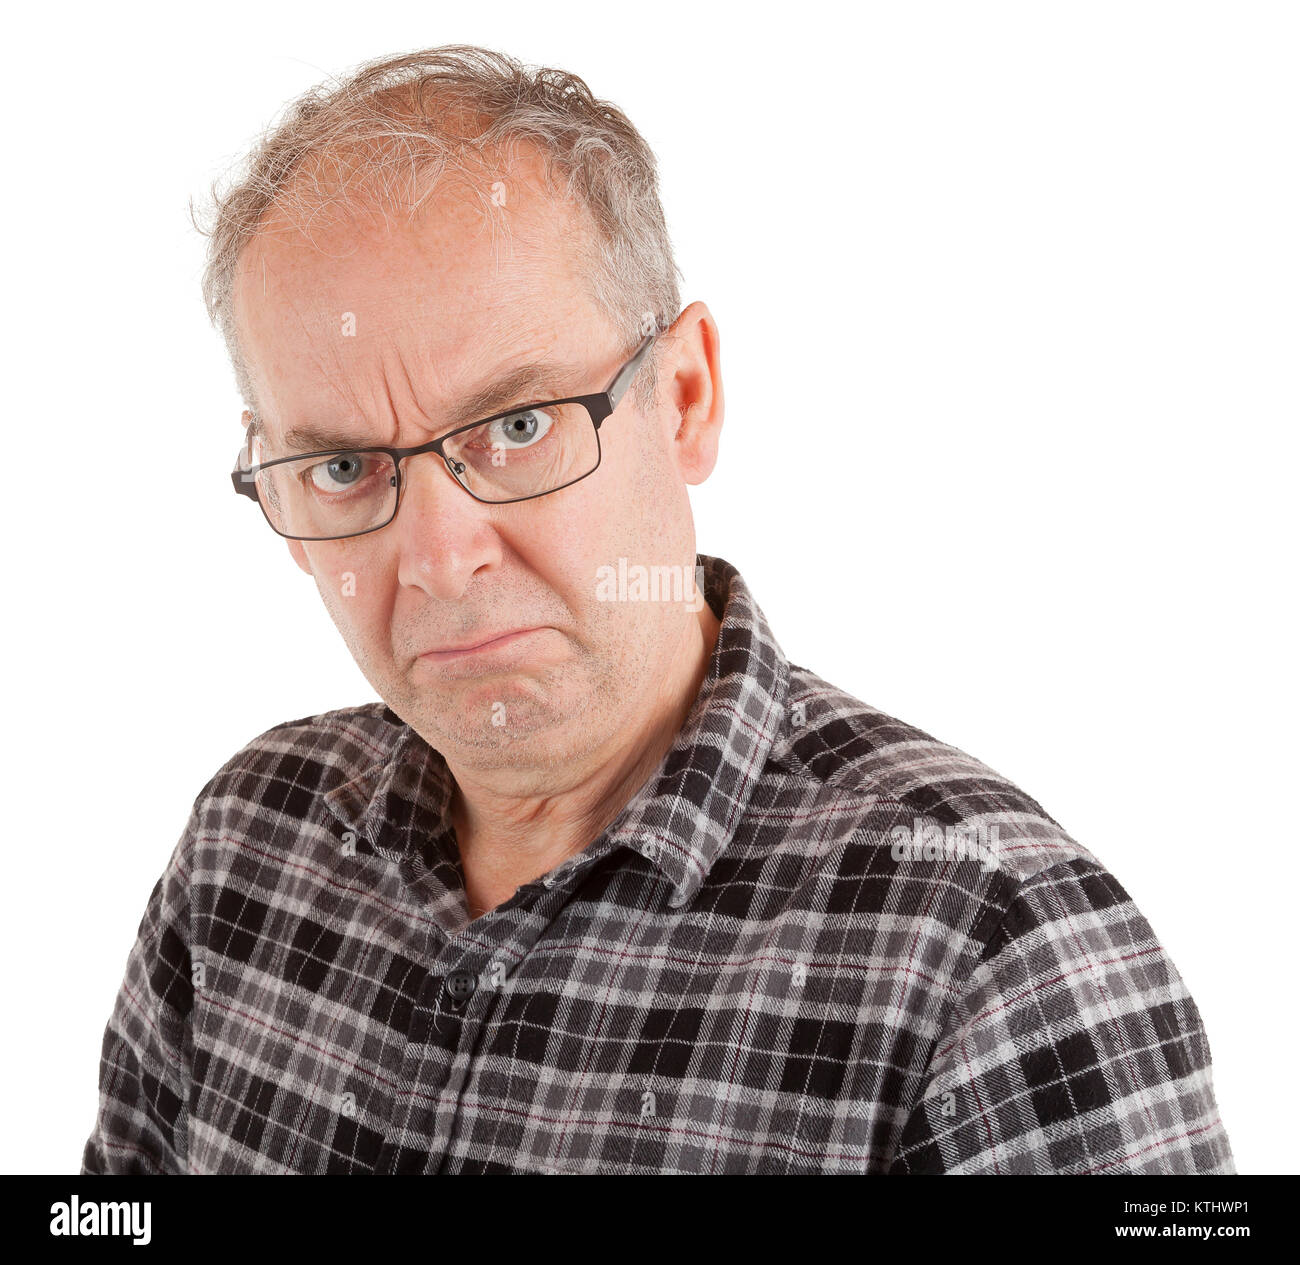 Man is dissatisfied about something. Stock Photo